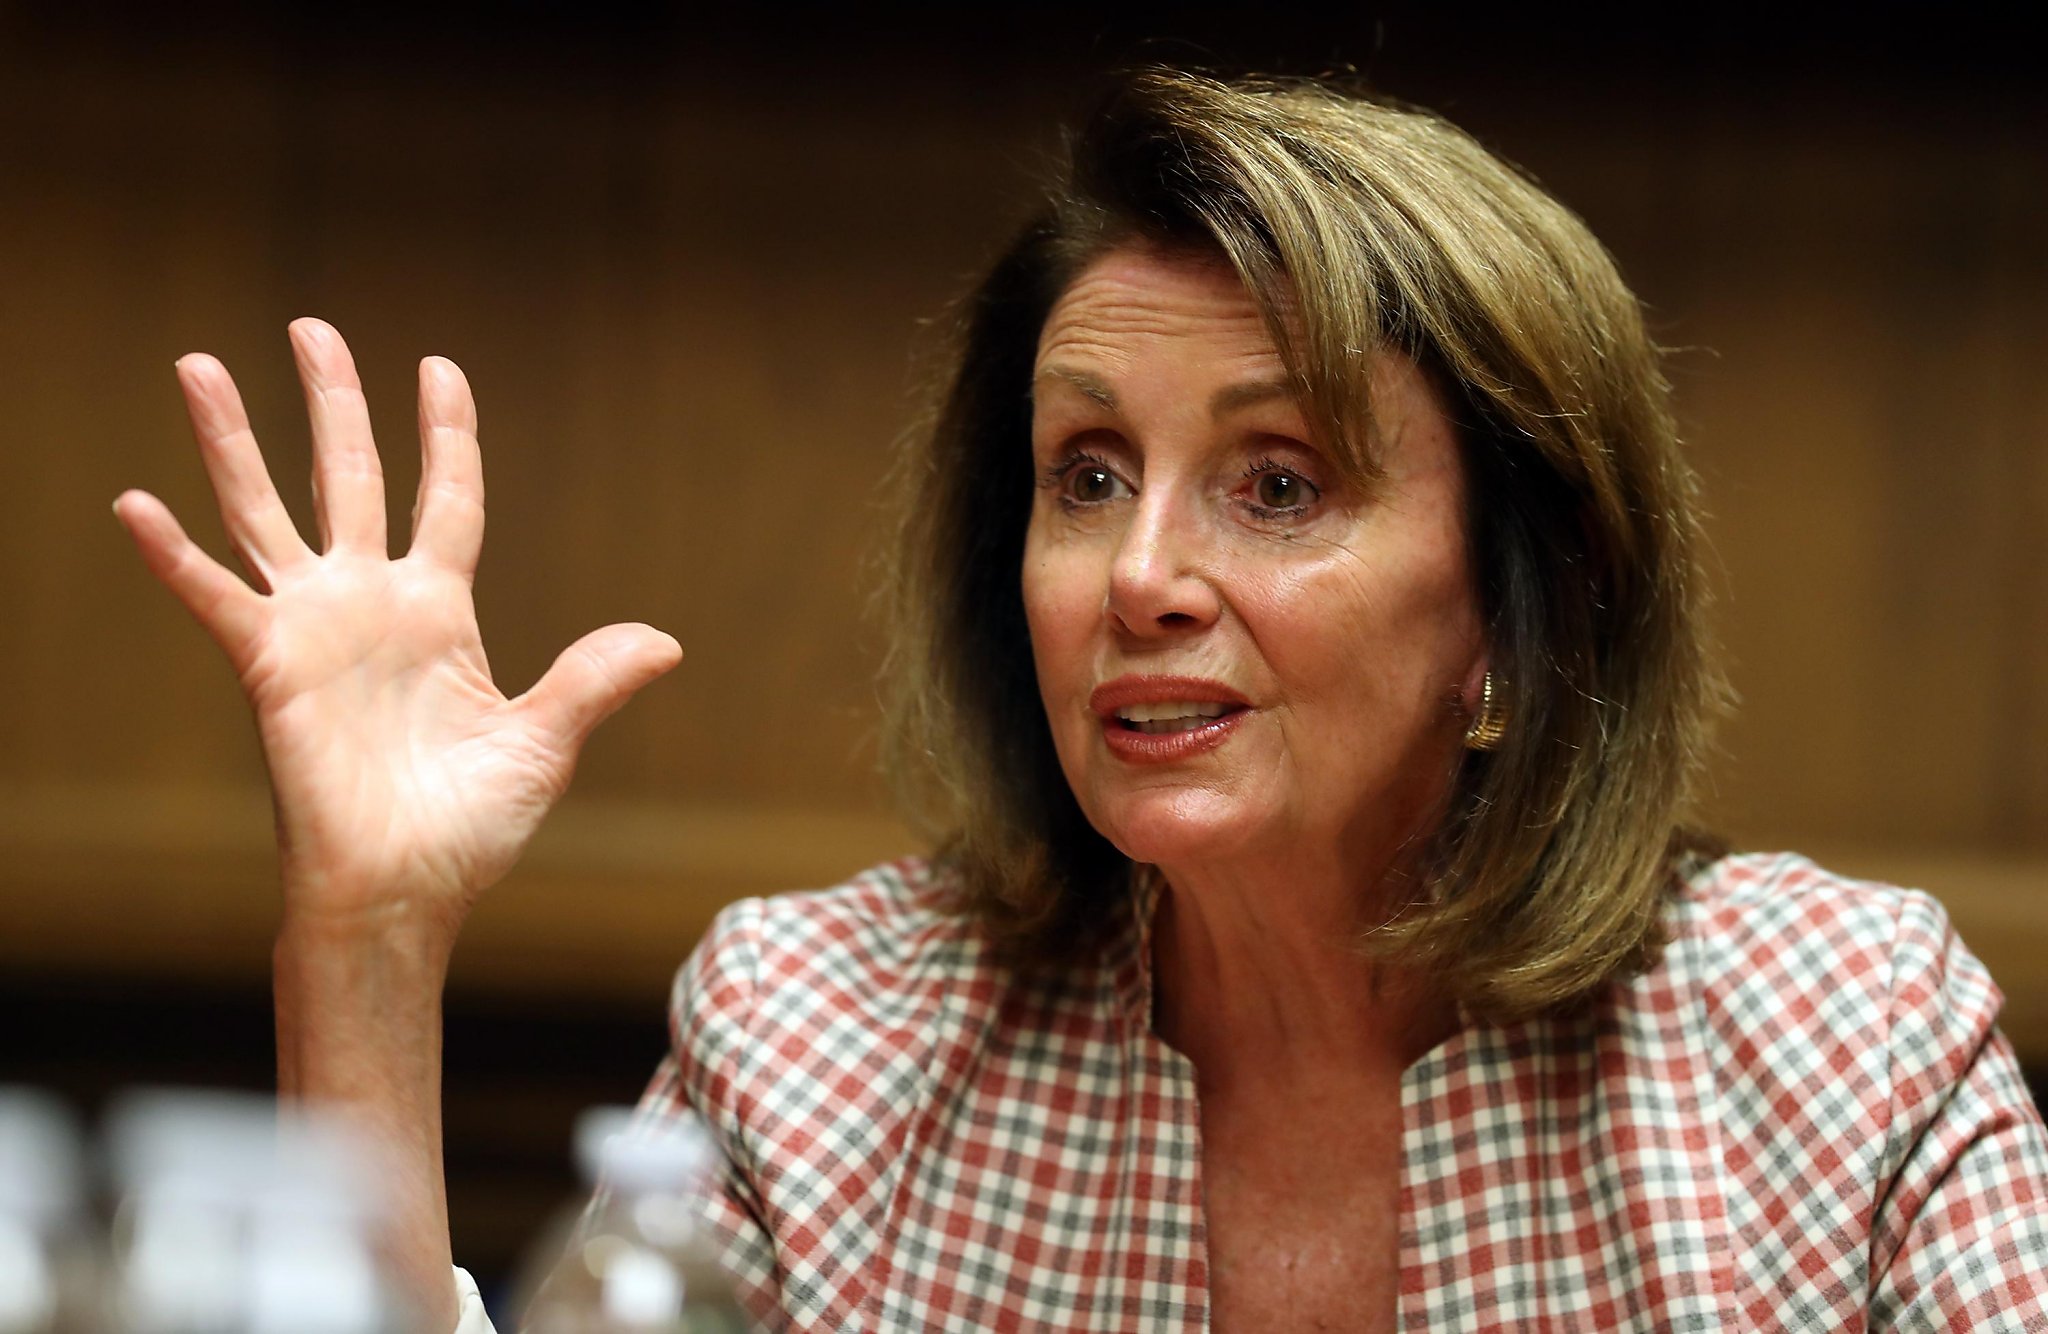 Is Trump the new Bush? Pelosi sees a way forward for Democrats - SFGate2048 x 1334